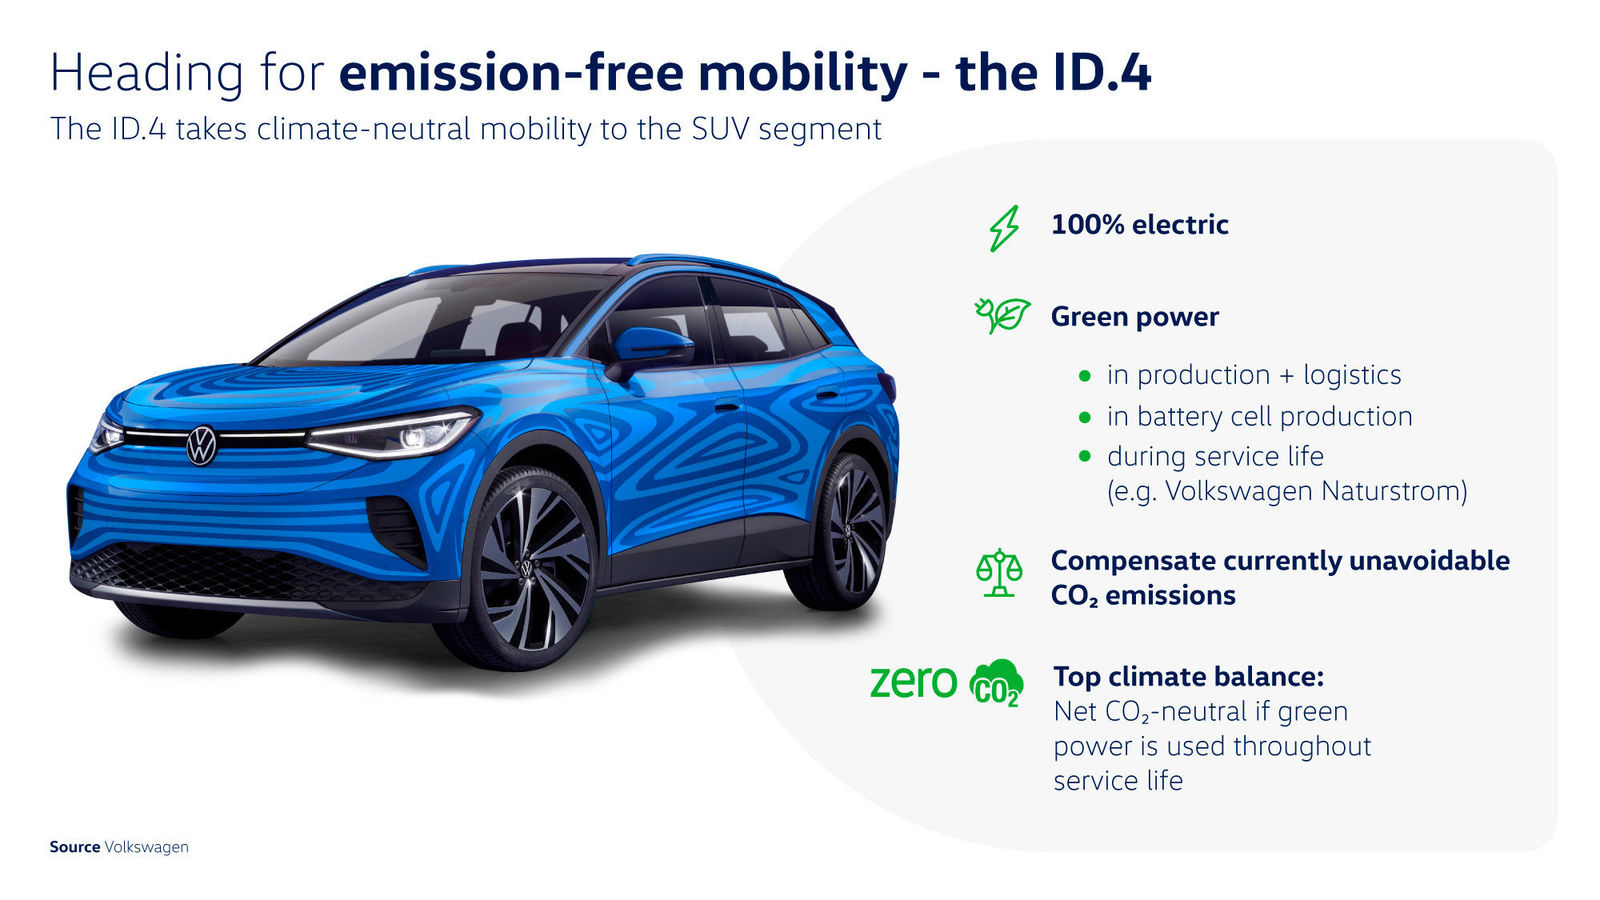 Story “The ID.4 to become an electrically powered world car”